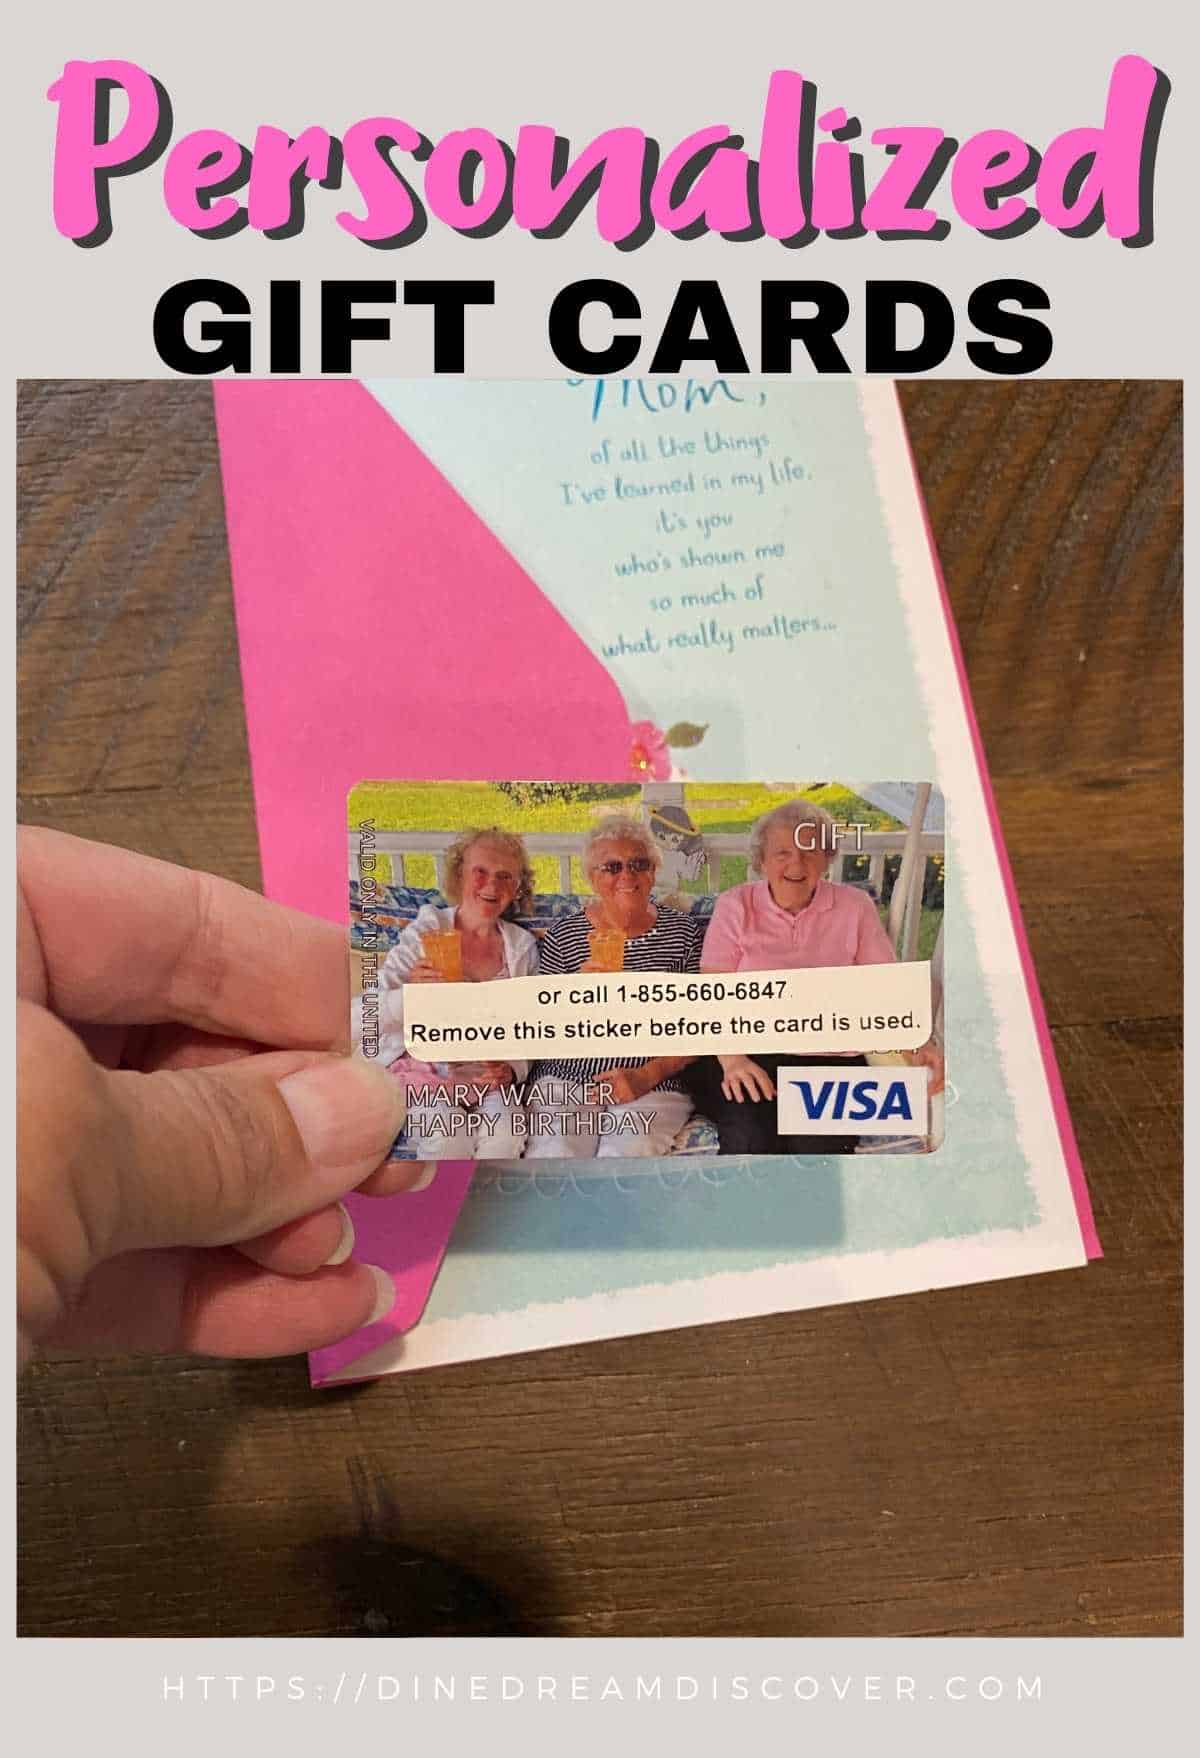 Personalized Gift Cards from Gift Card Granny